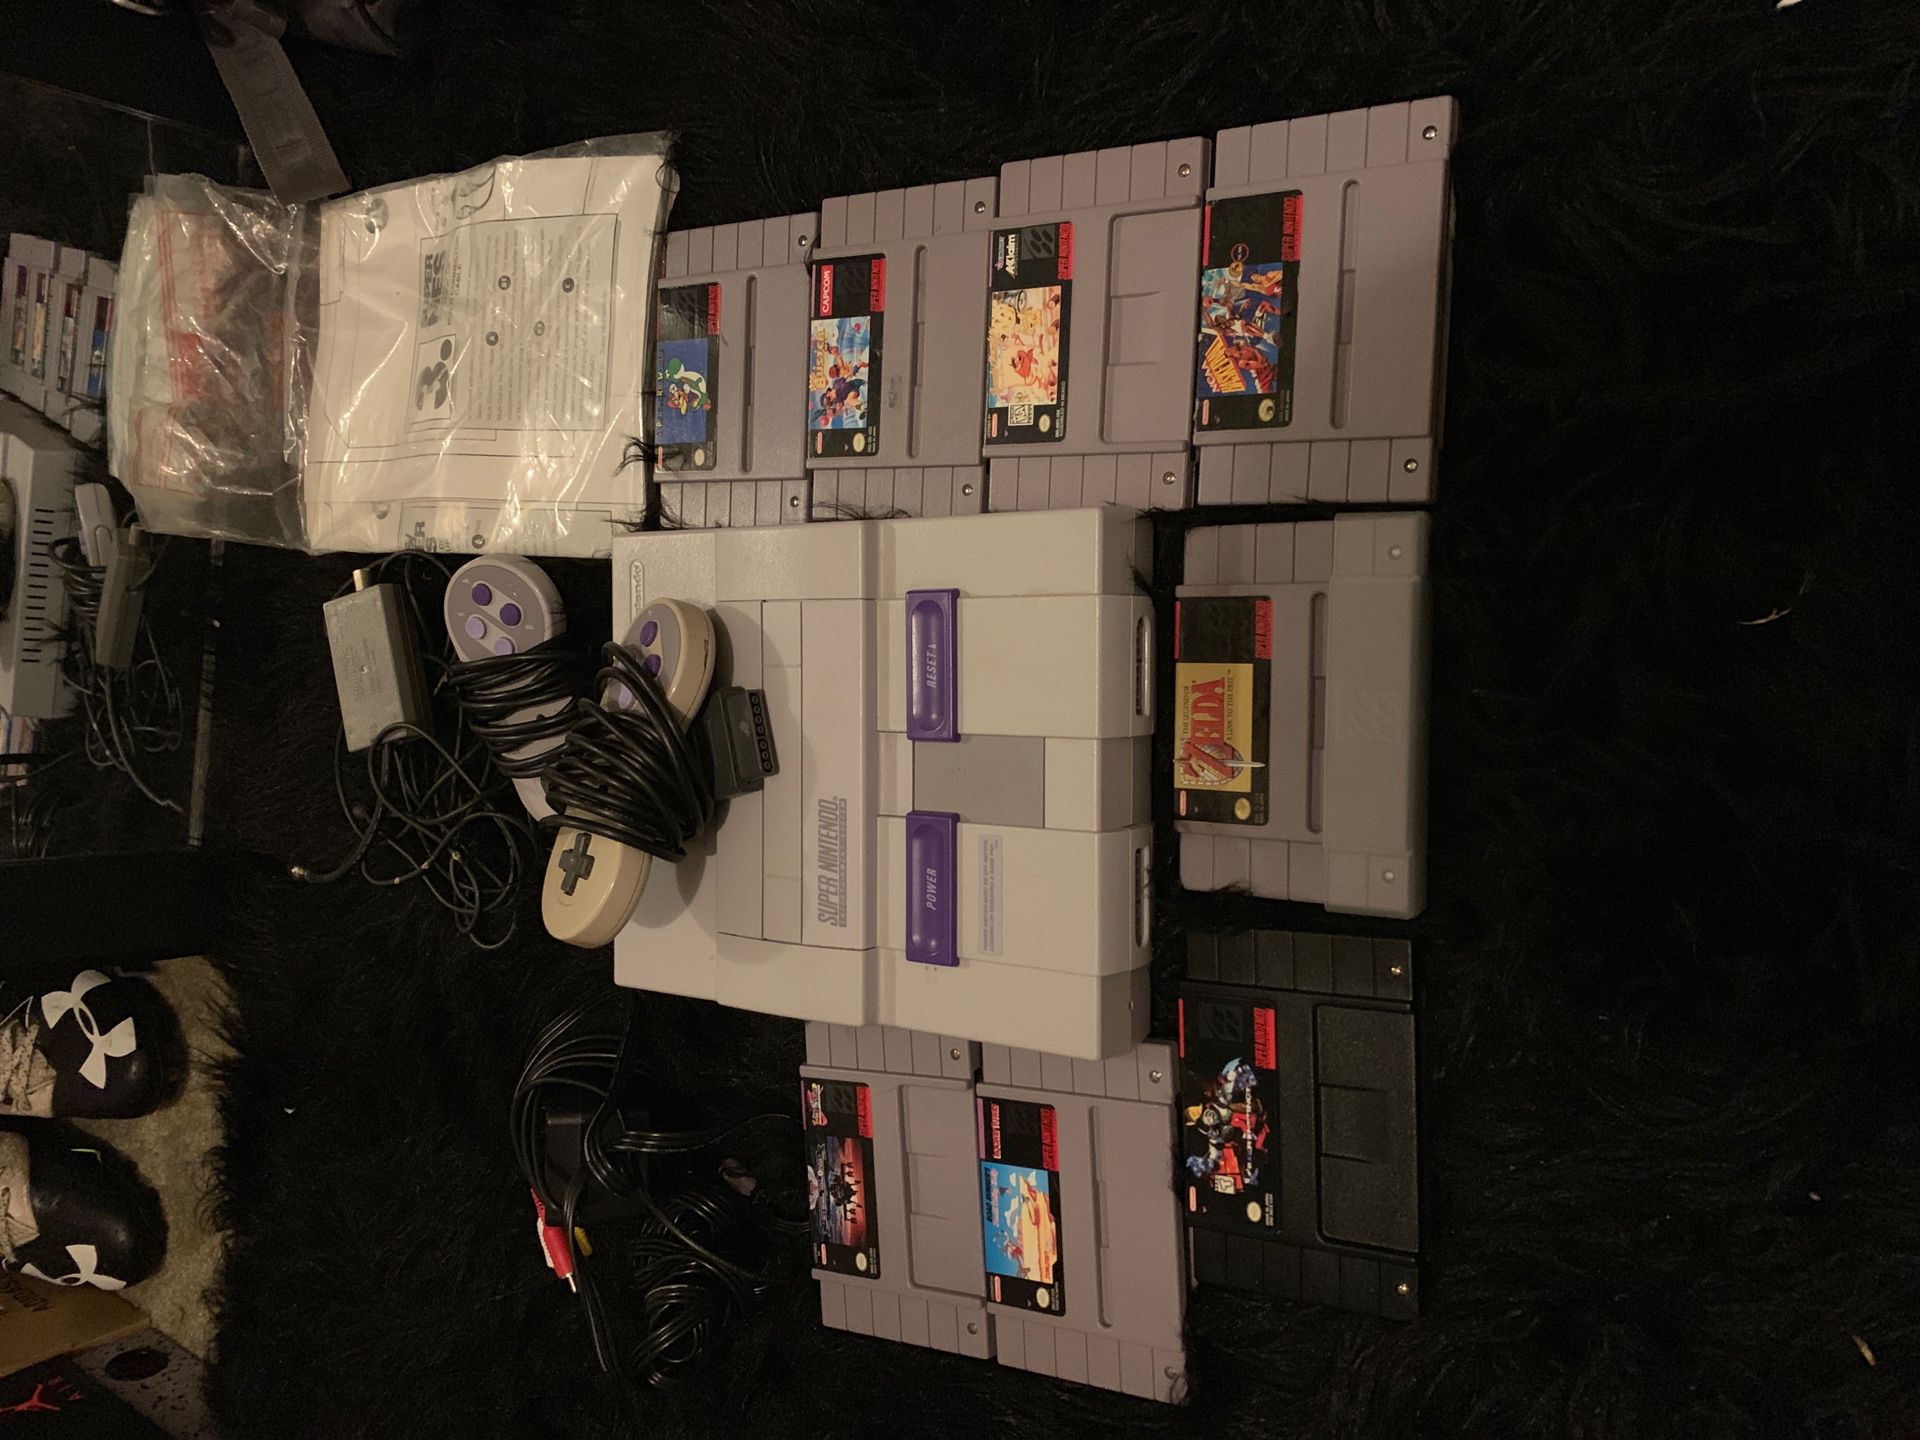 Super Nintendo NES with 2 controllers & 8 games + original instructions manual